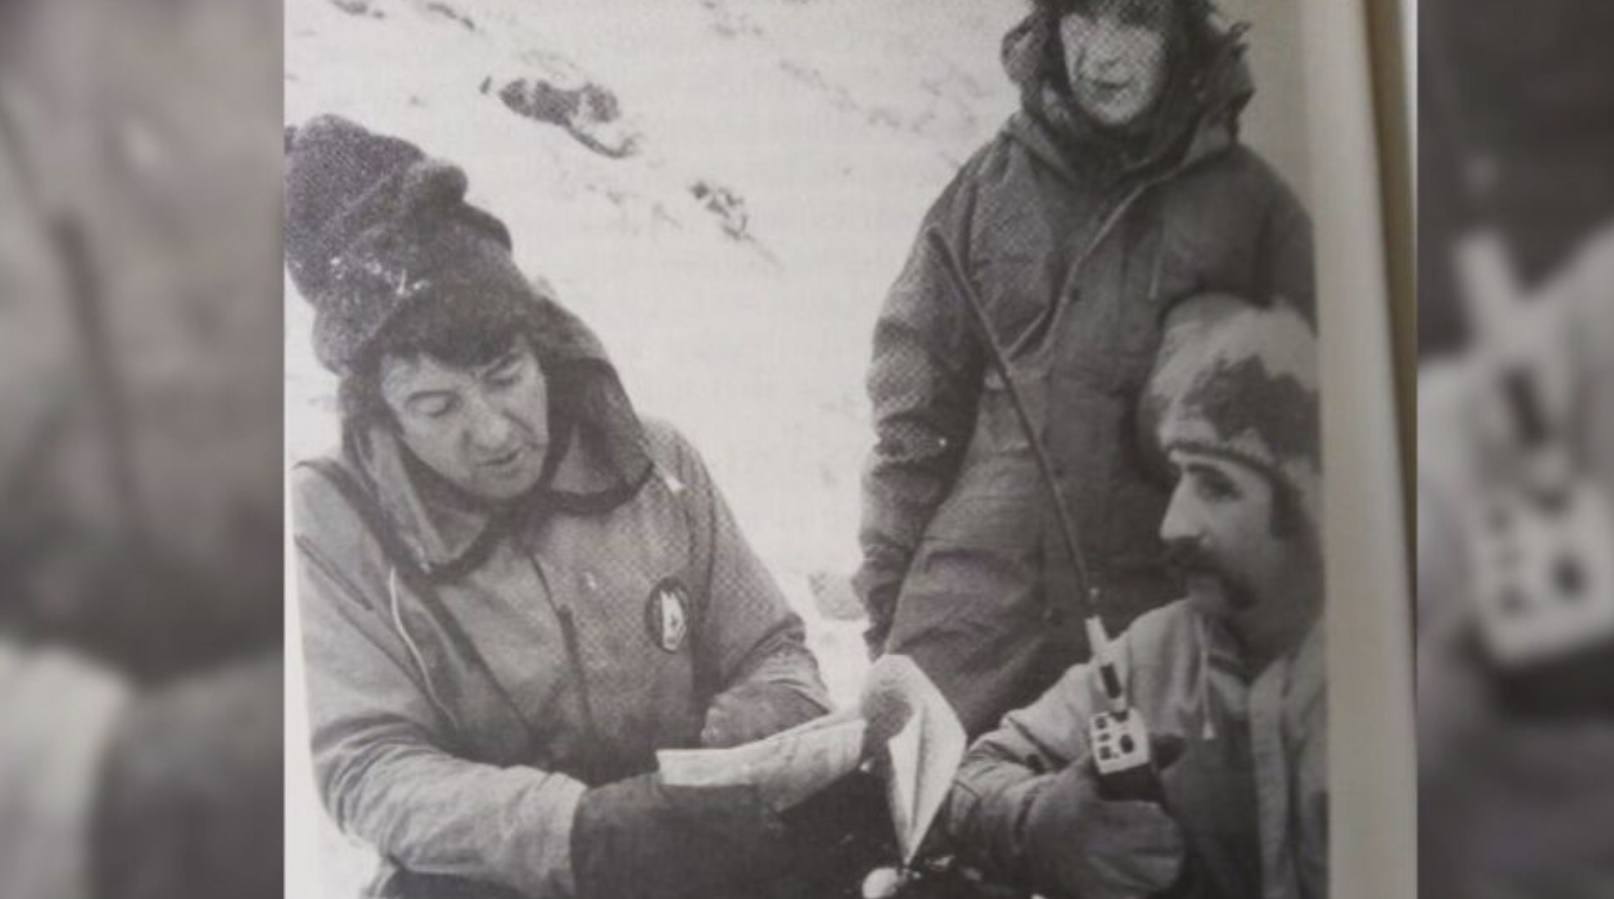 The Cairngorm Rescue Team has responded to around 2,500 callouts over the last 60 years